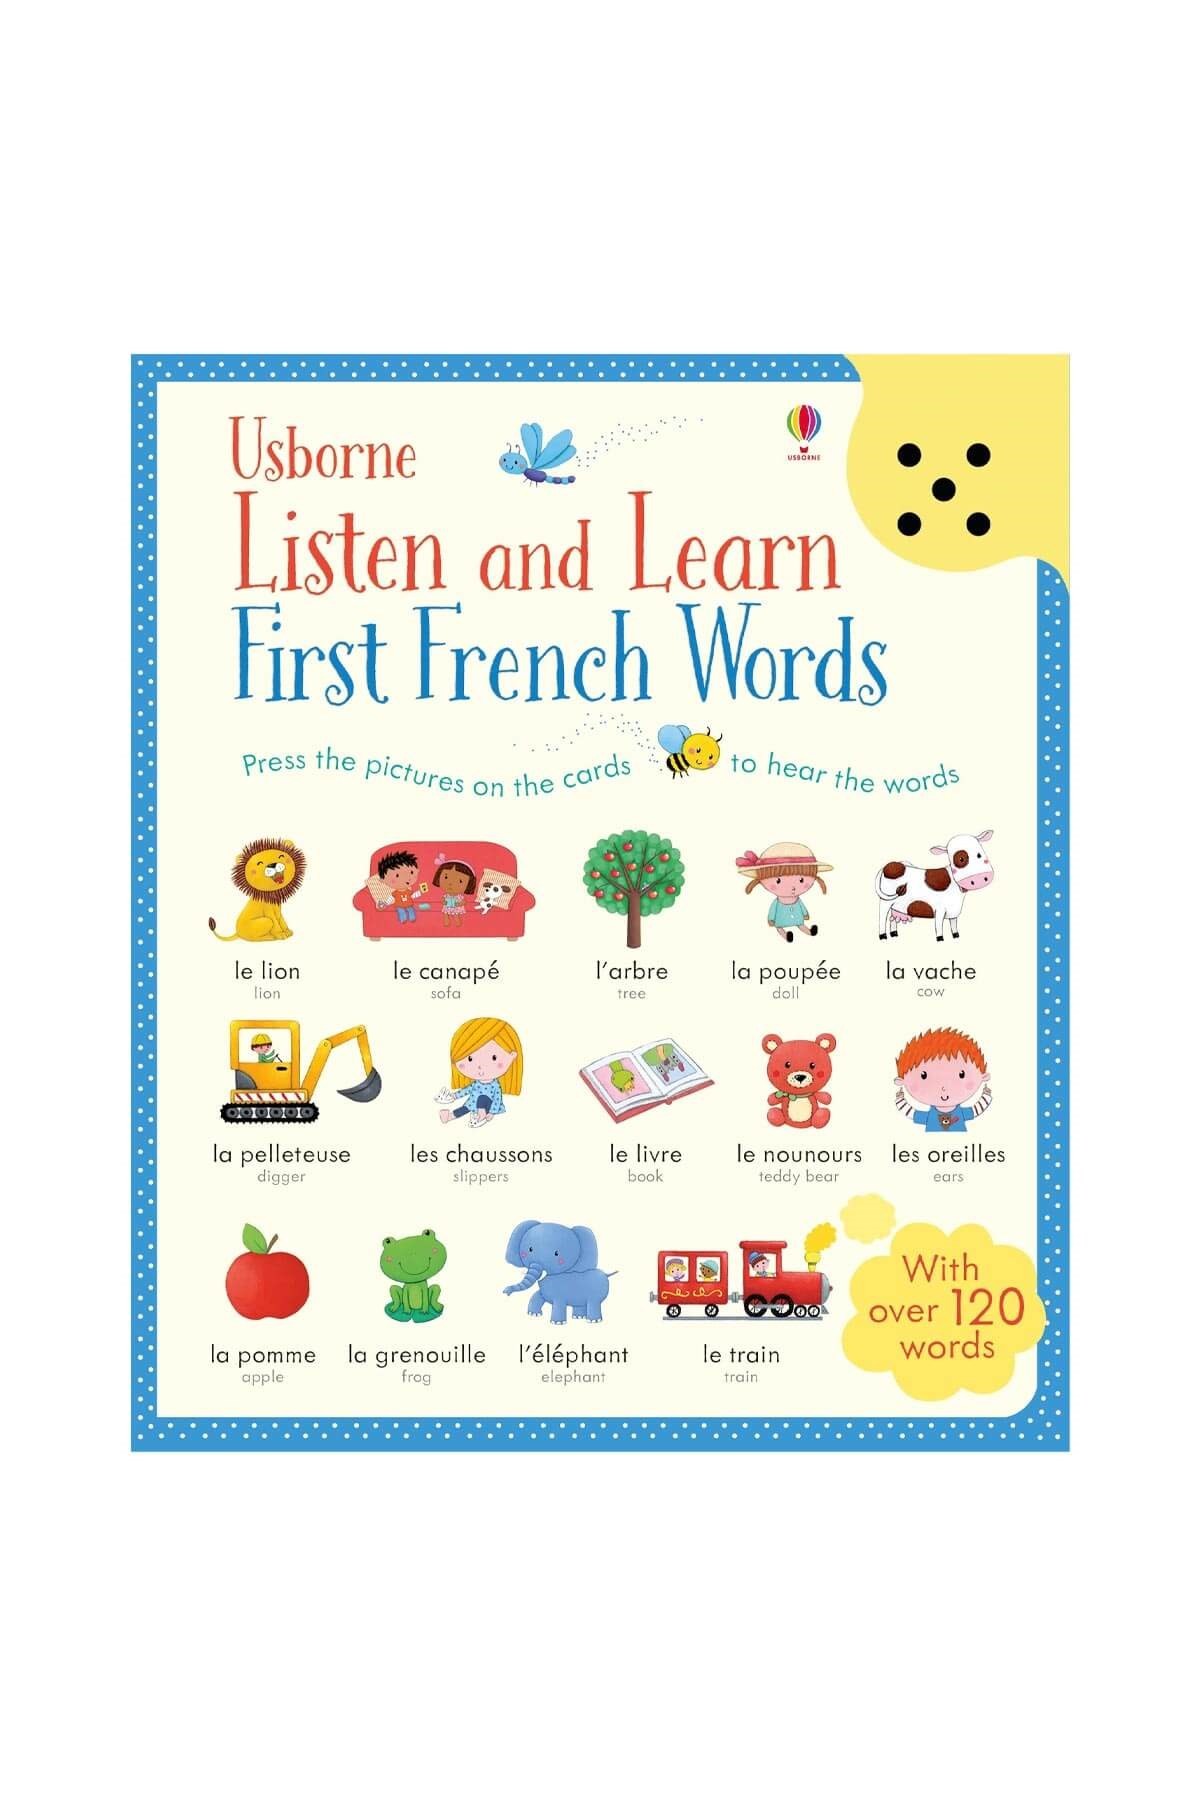 The Usborne Listen and Learn First French Words